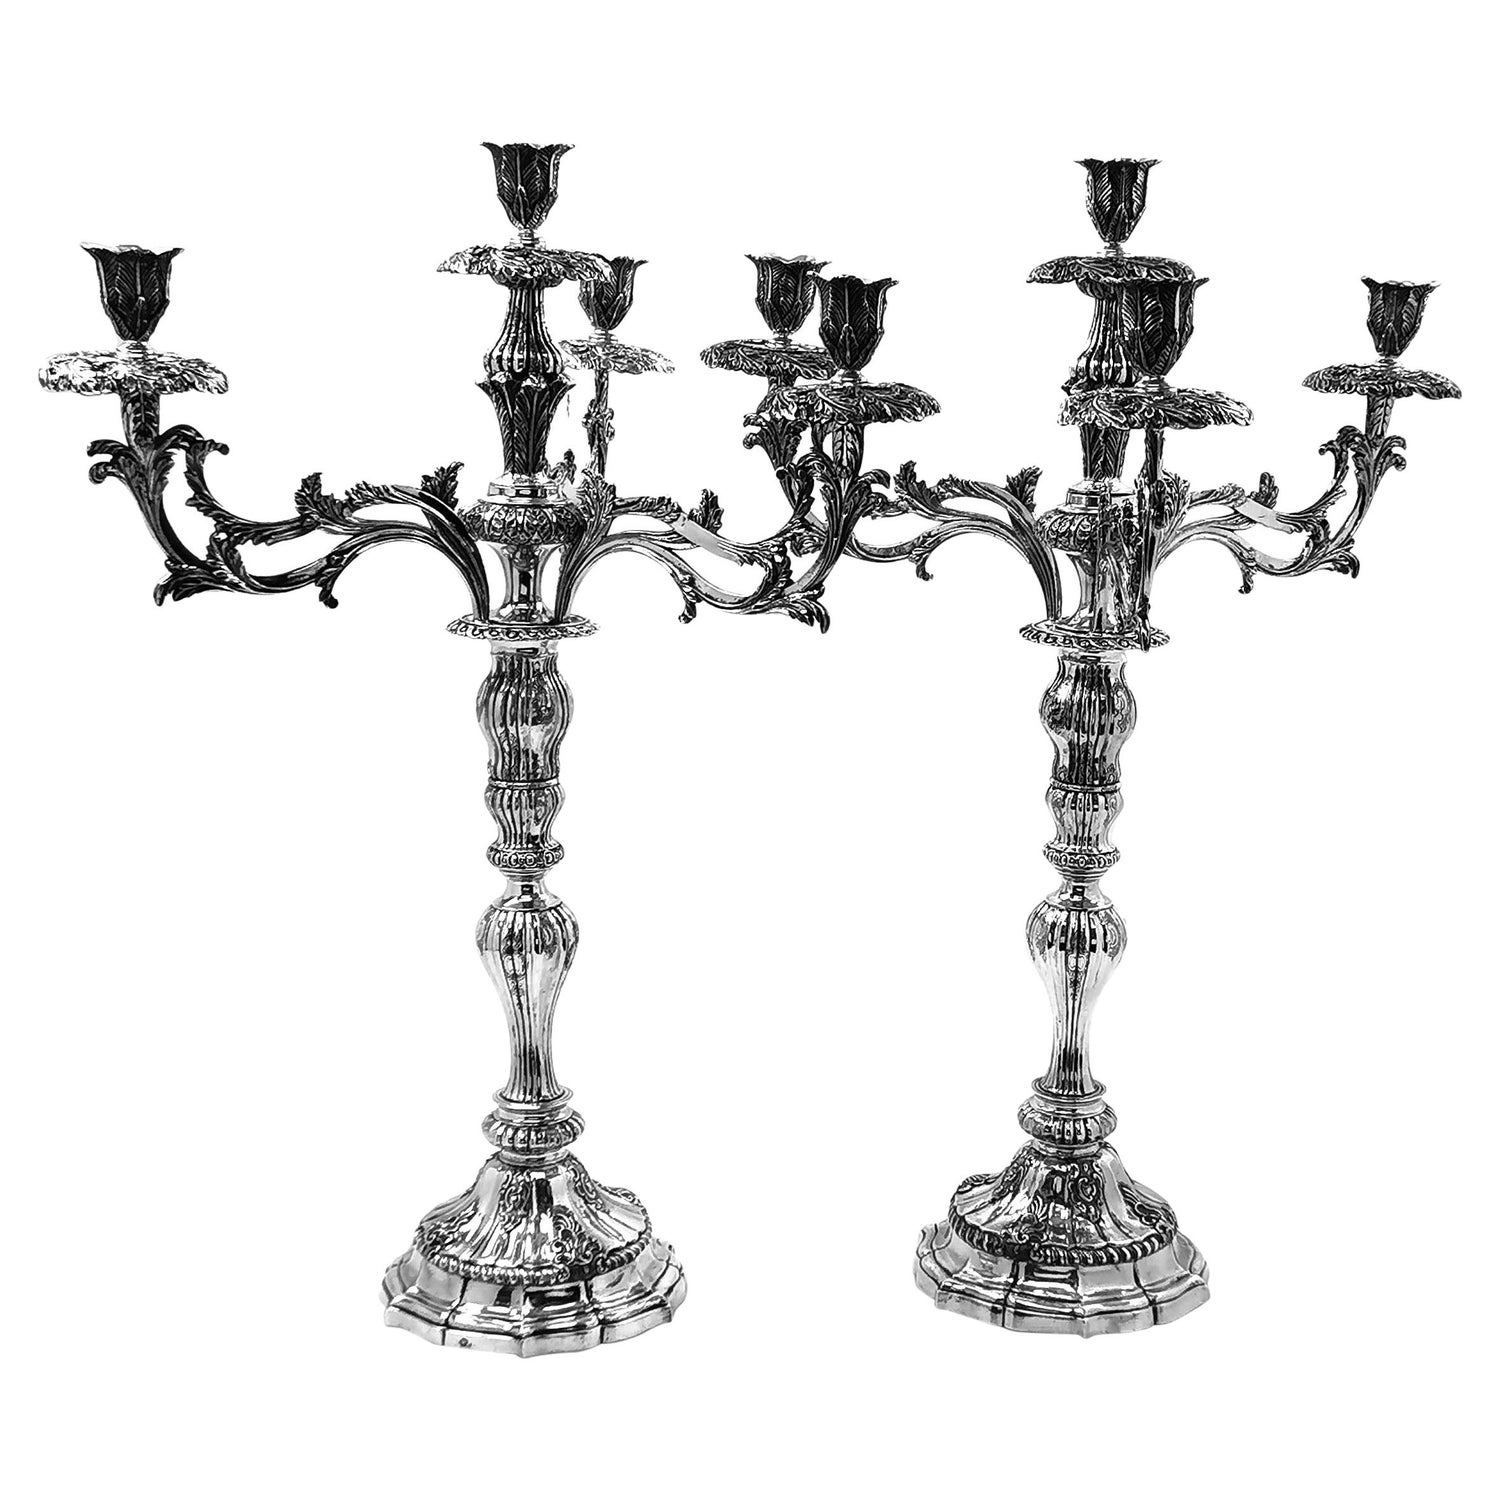 Rare Pair of Antique Portuguese Silver Candelabra c. 1800 19th Candle Holders